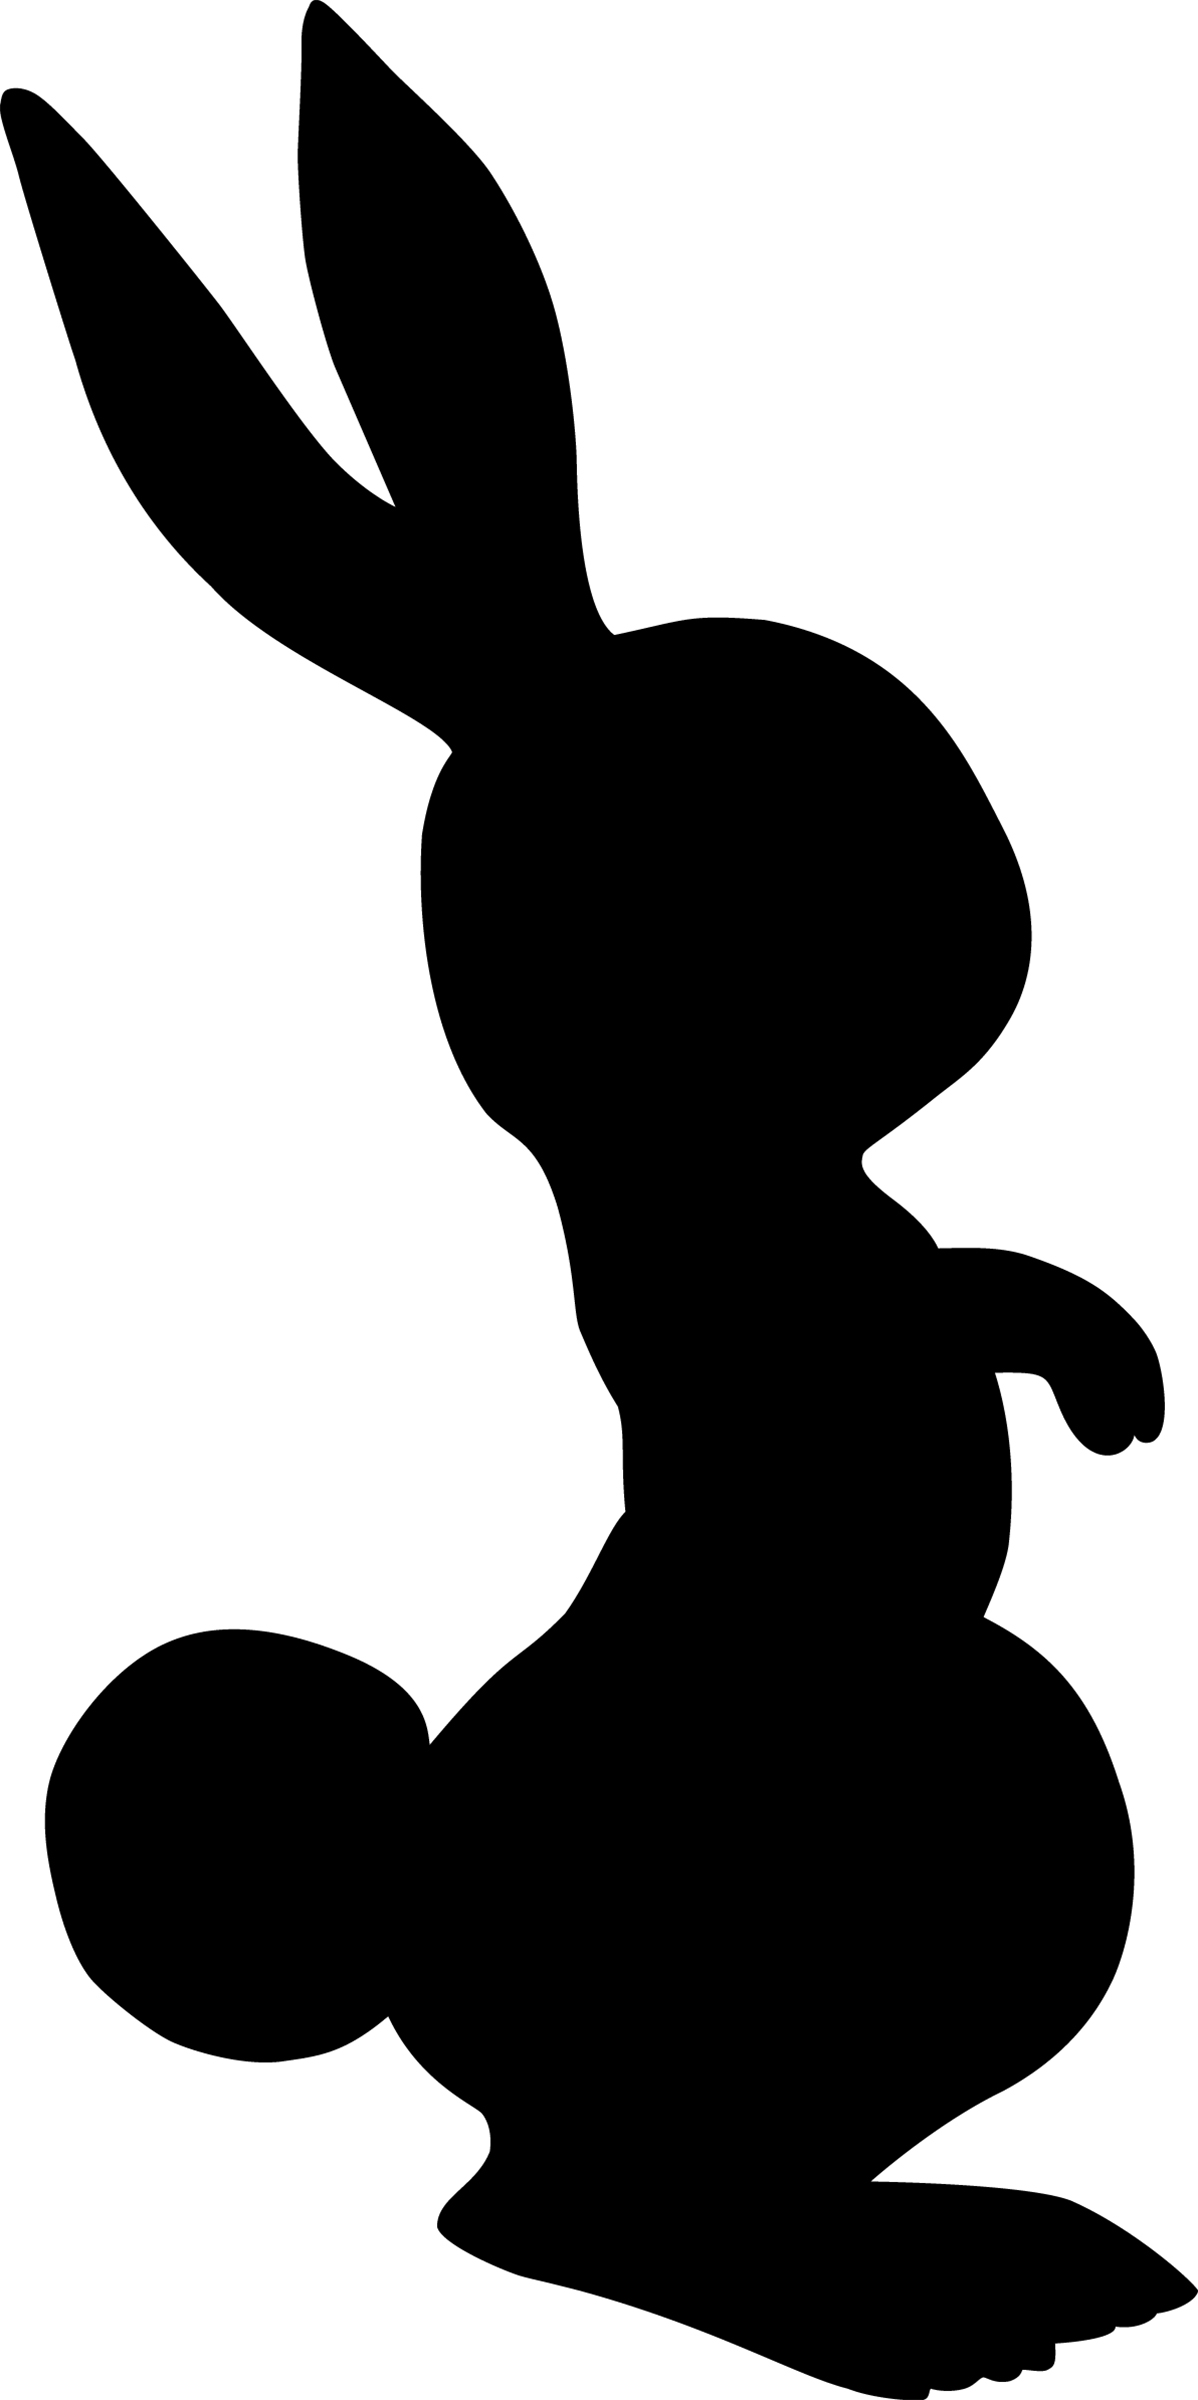 20 Bunny Rabbit Silhouettes and Clip Art The Graphics Fairy